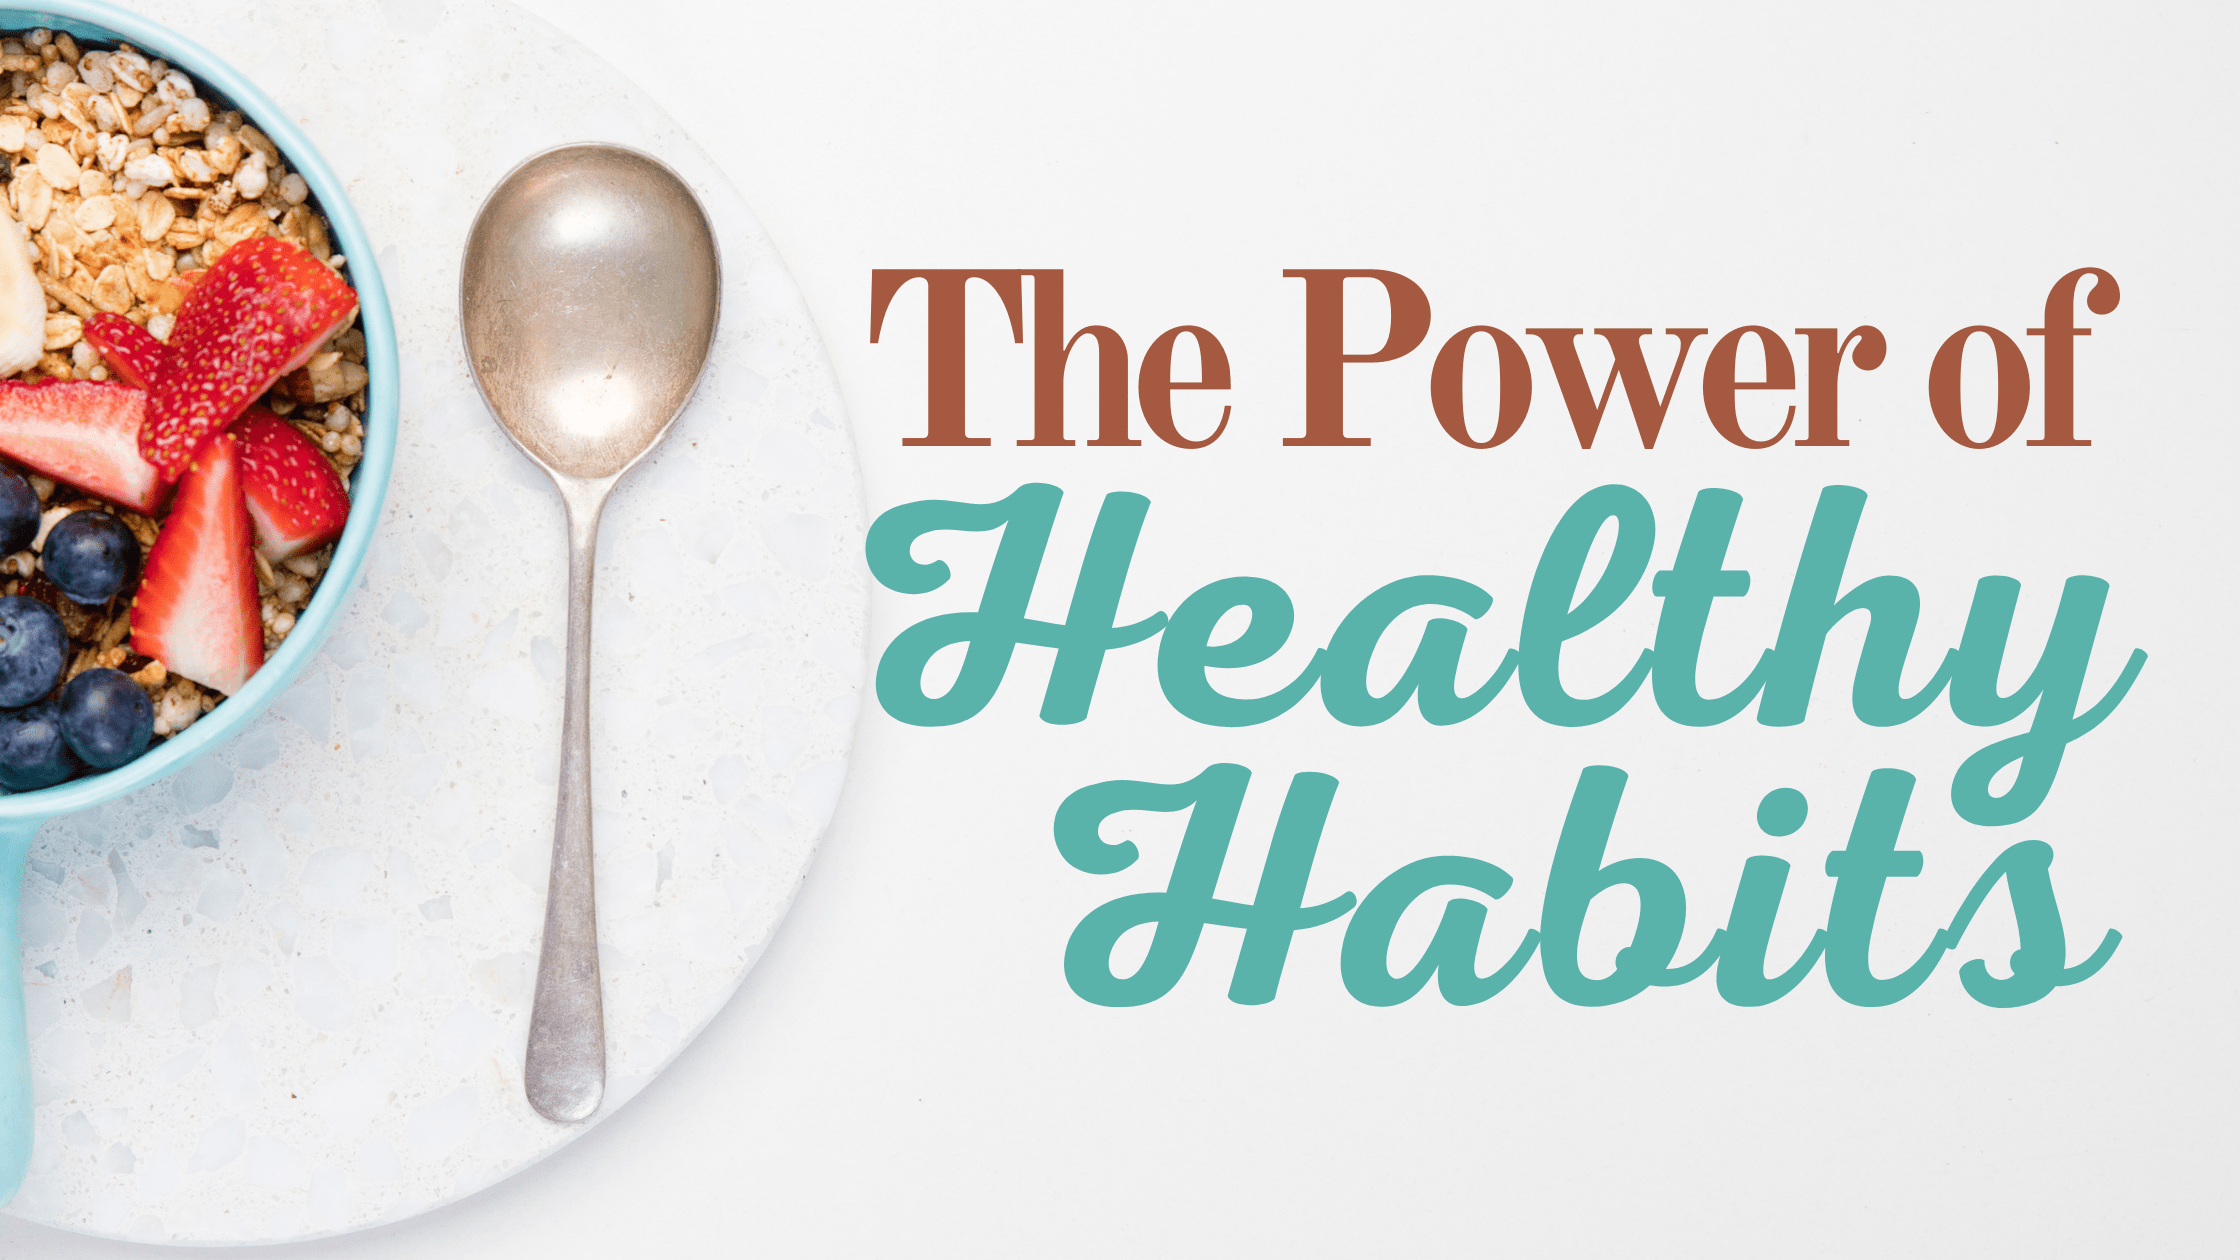 The Power of Healthy Habits